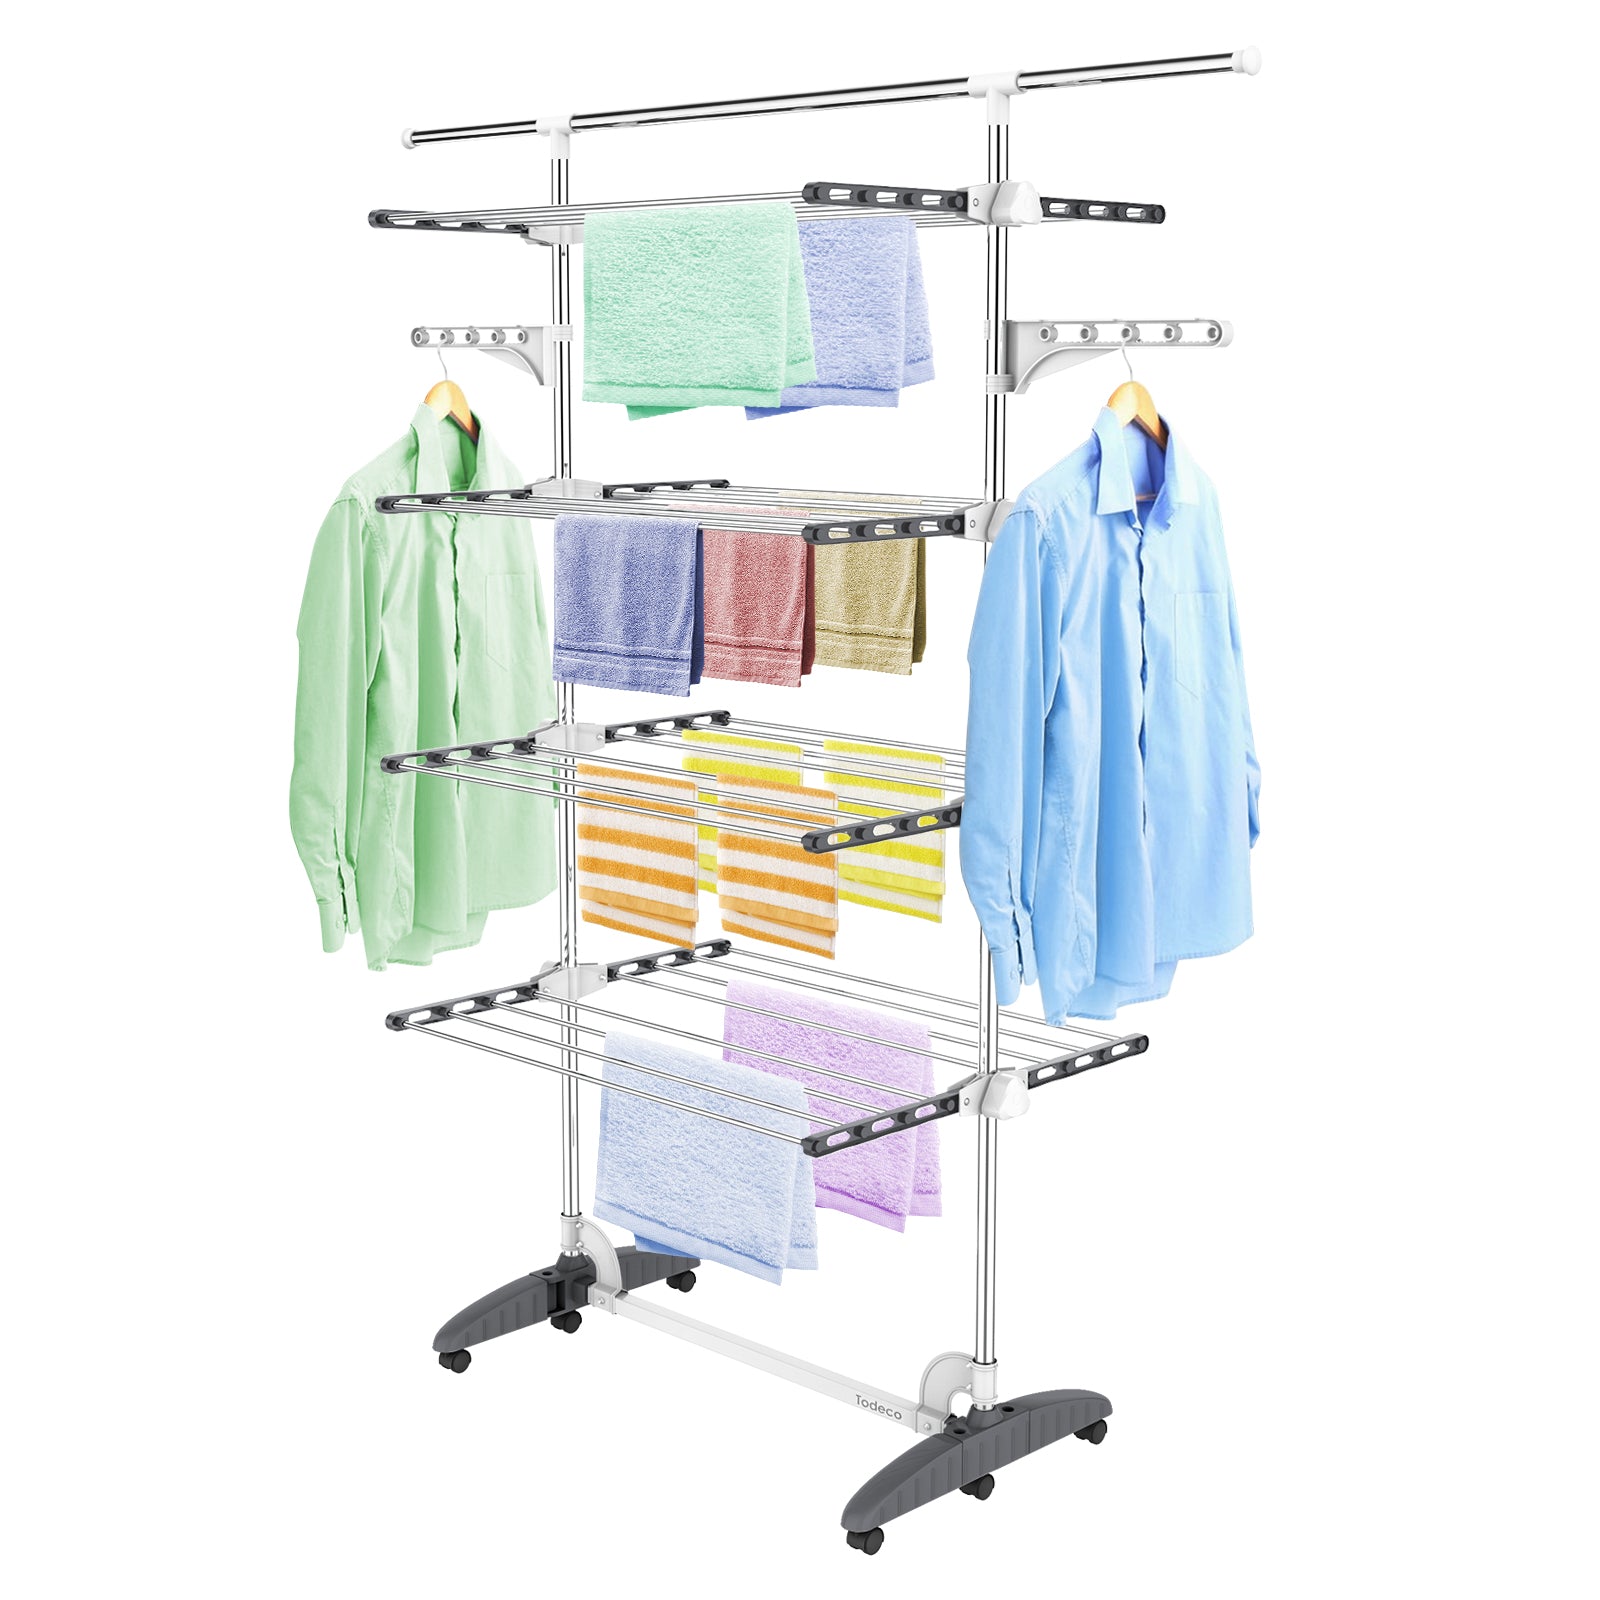 Clothes Drying Rack, 4 shelves (wings/extended top bar, Grey/White)